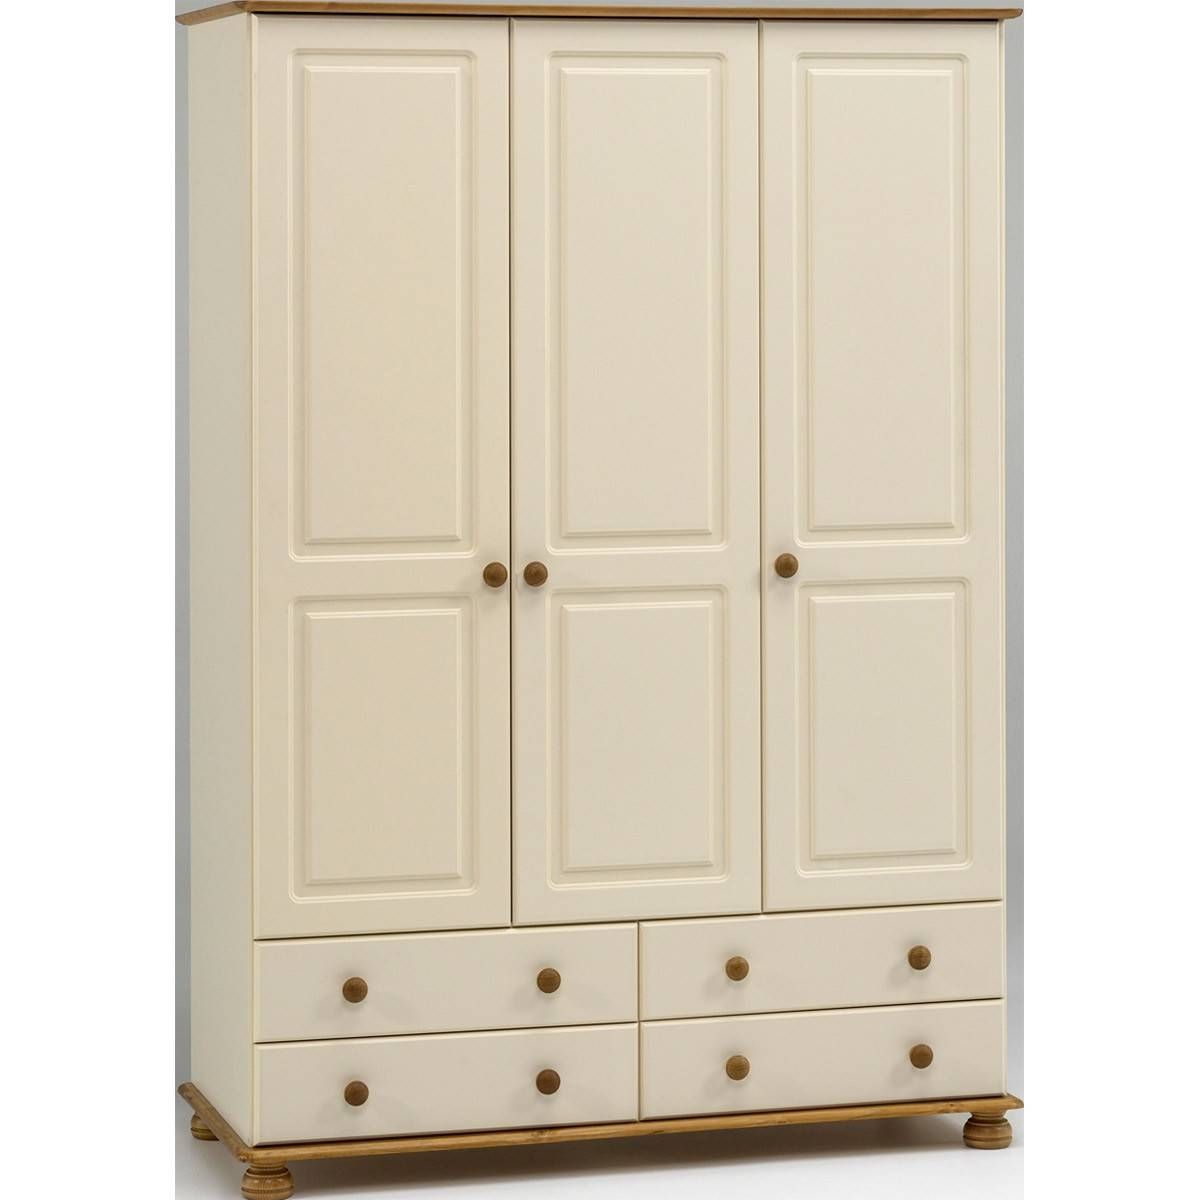 Salisbury Cream And Pine 3 Door 4 Drawer Wardrobe From The Pertaining To Pine Wardrobes With Drawers (View 8 of 15)